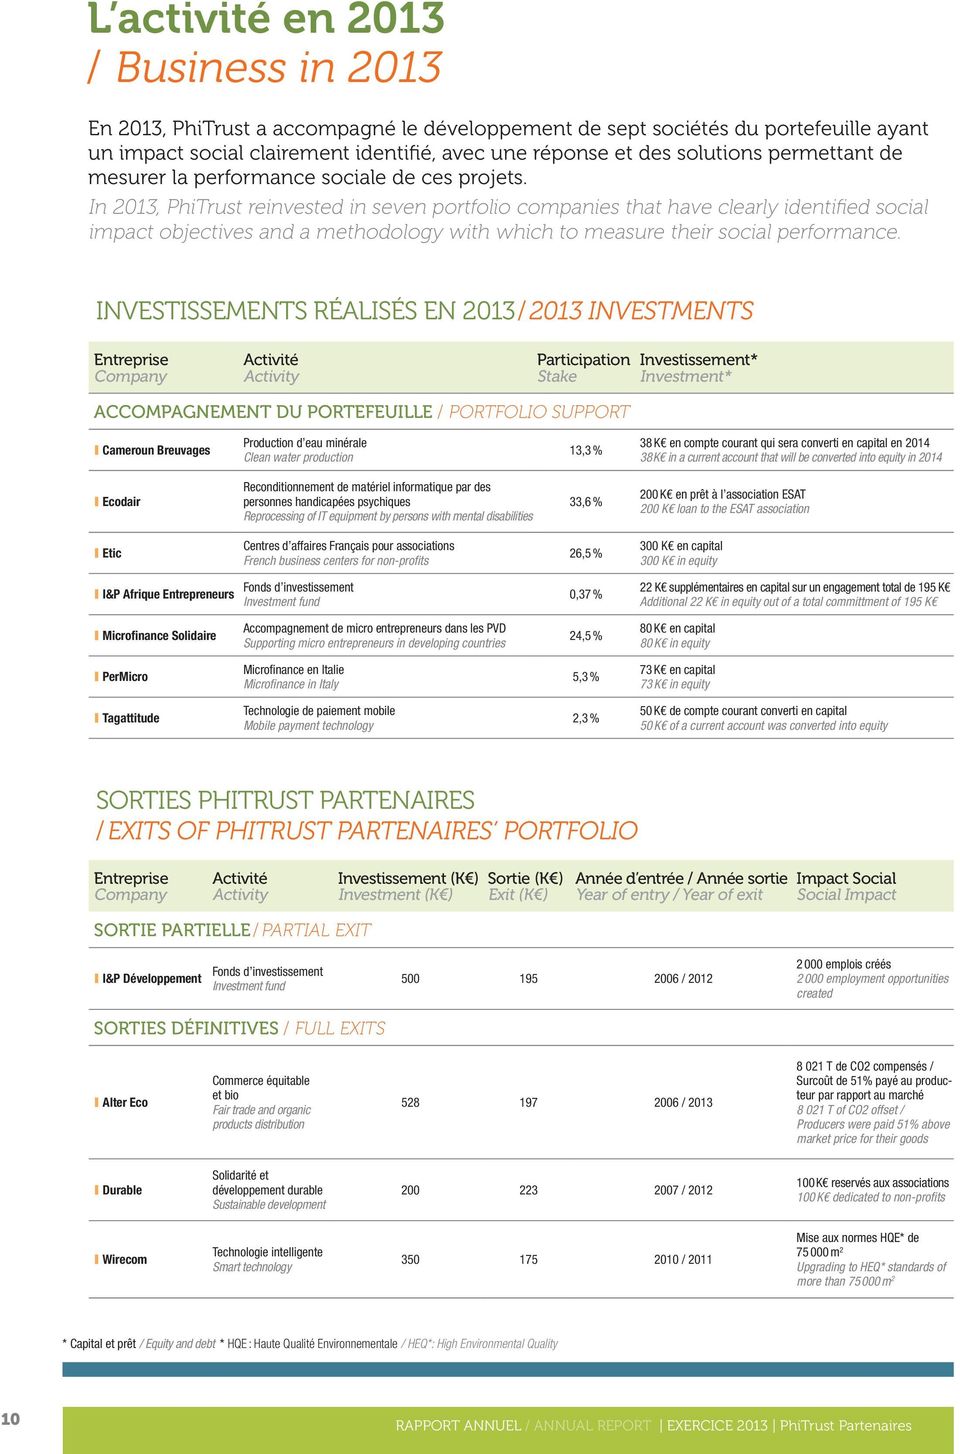 In 2013, PhiTrust reinvested in seven portfolio companies that have clearly identified social impact objectives and a methodology with which to measure their social performance.